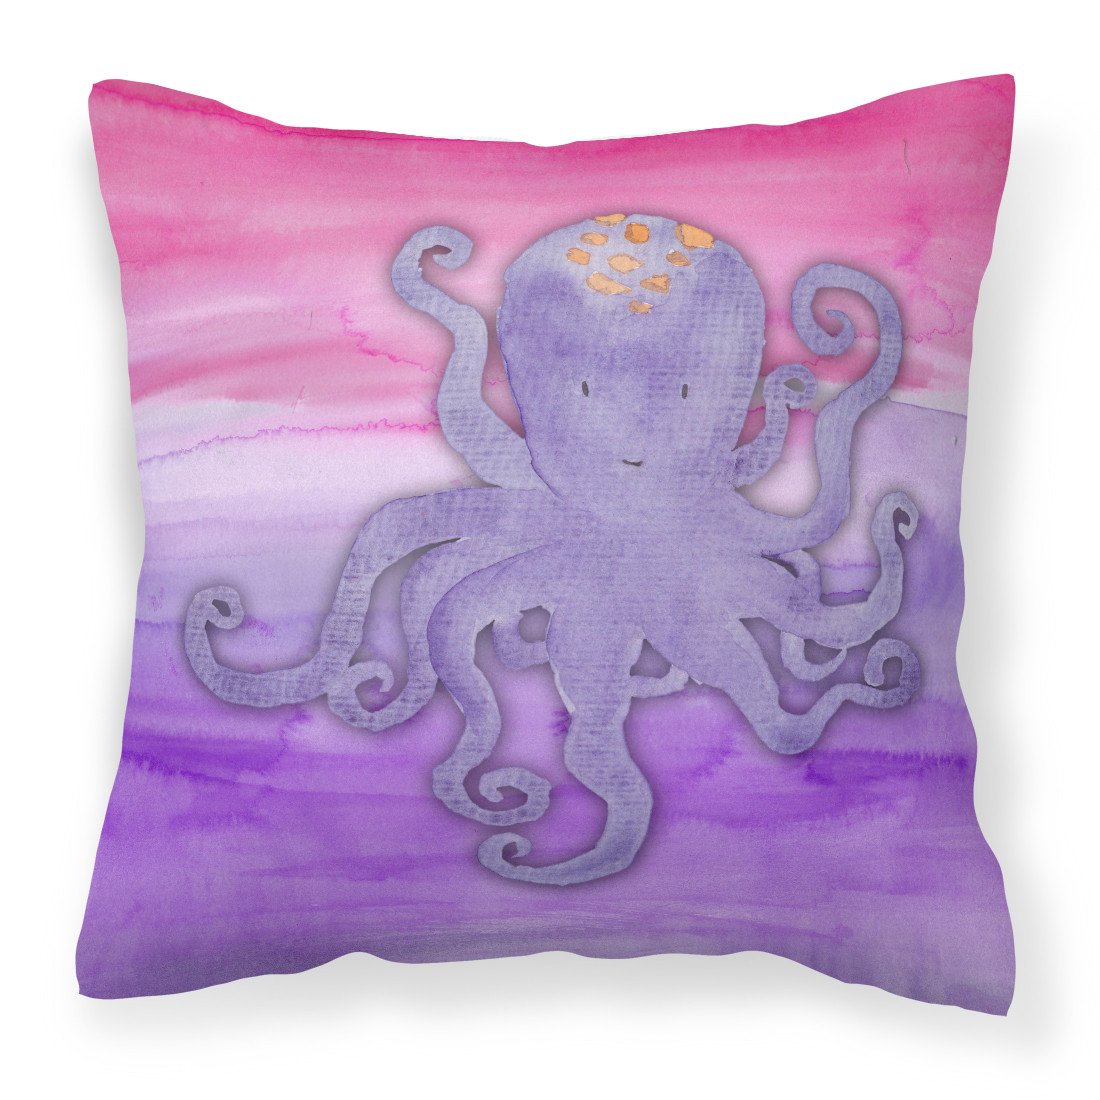 Octopus Watercolor Fabric Decorative Pillow BB7424PW1818 by Caroline's Treasures